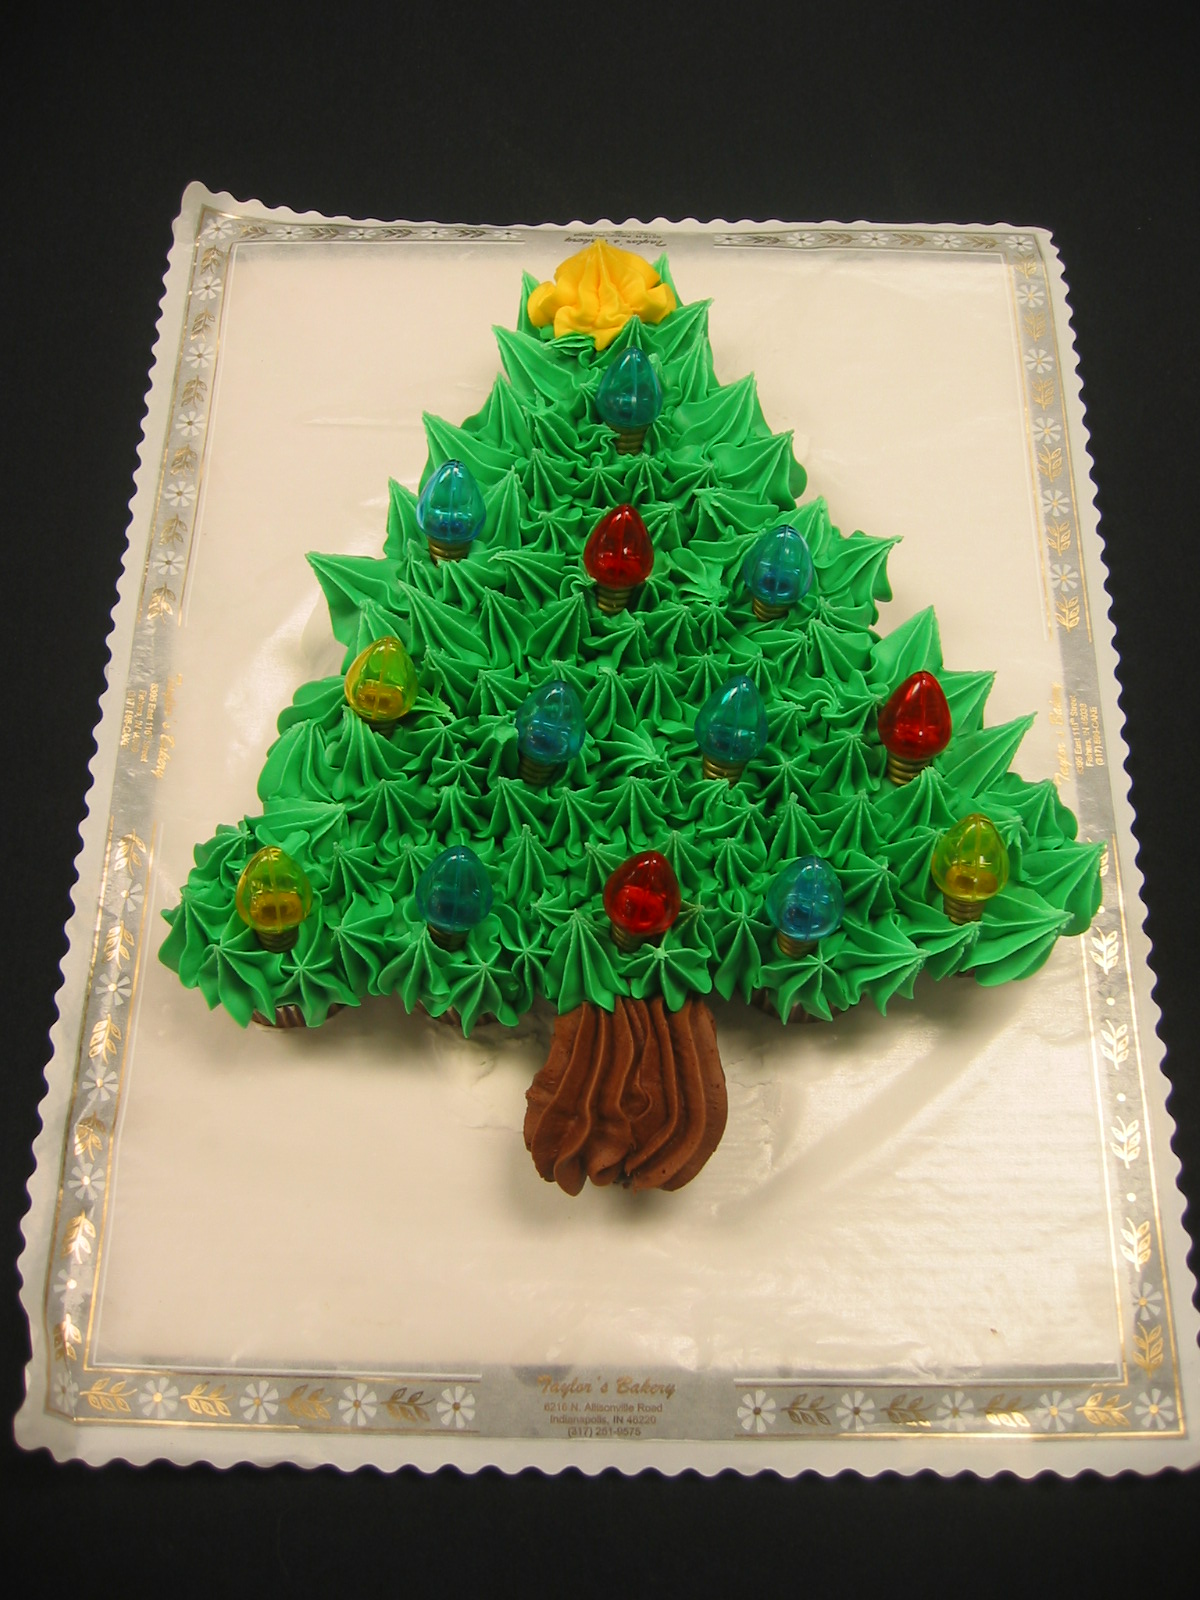 A Christmas tree cake with the baking … – License Images